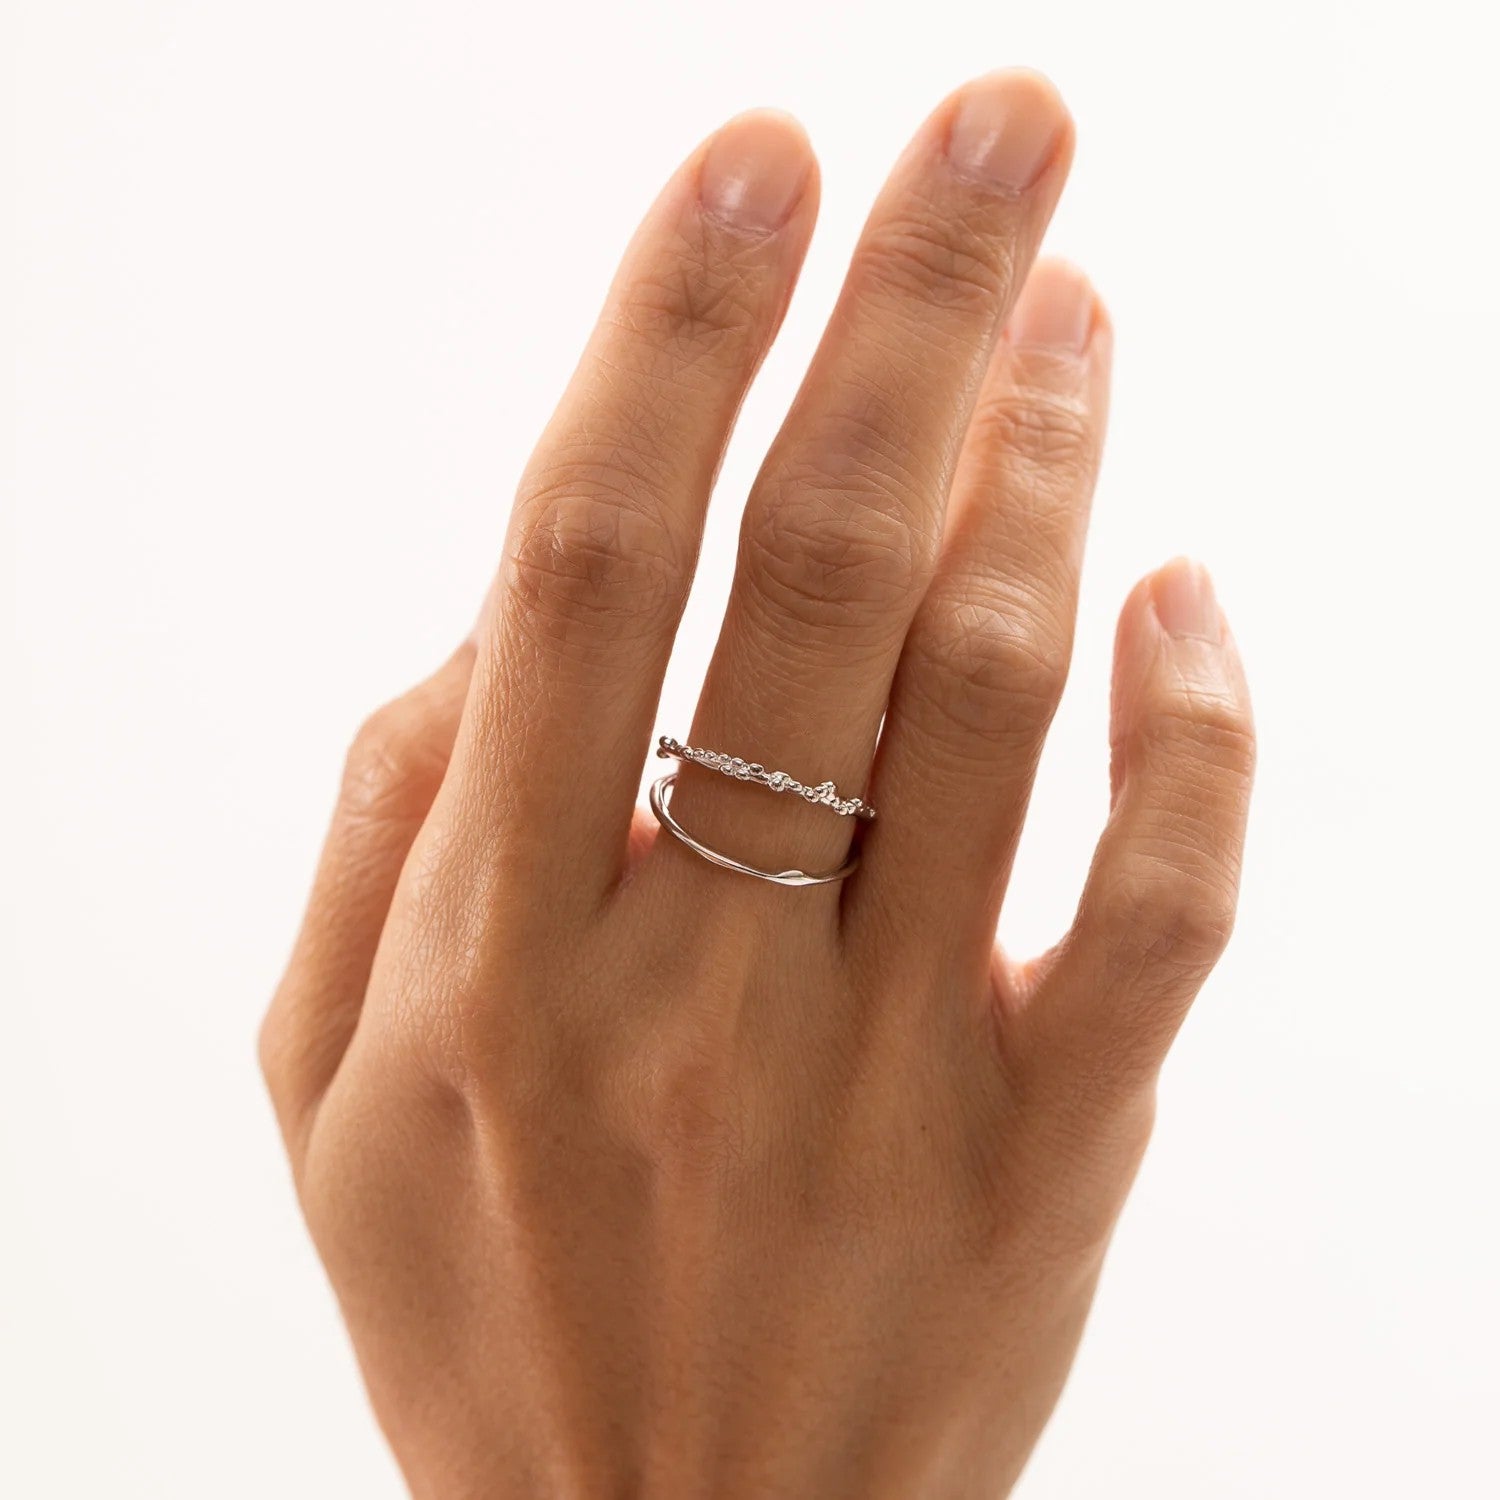 A resizable silver ring featuring a minimalist design, made of 925 sterling silver and rhodium plated. Hypoallergenic and elegant for all occasions.